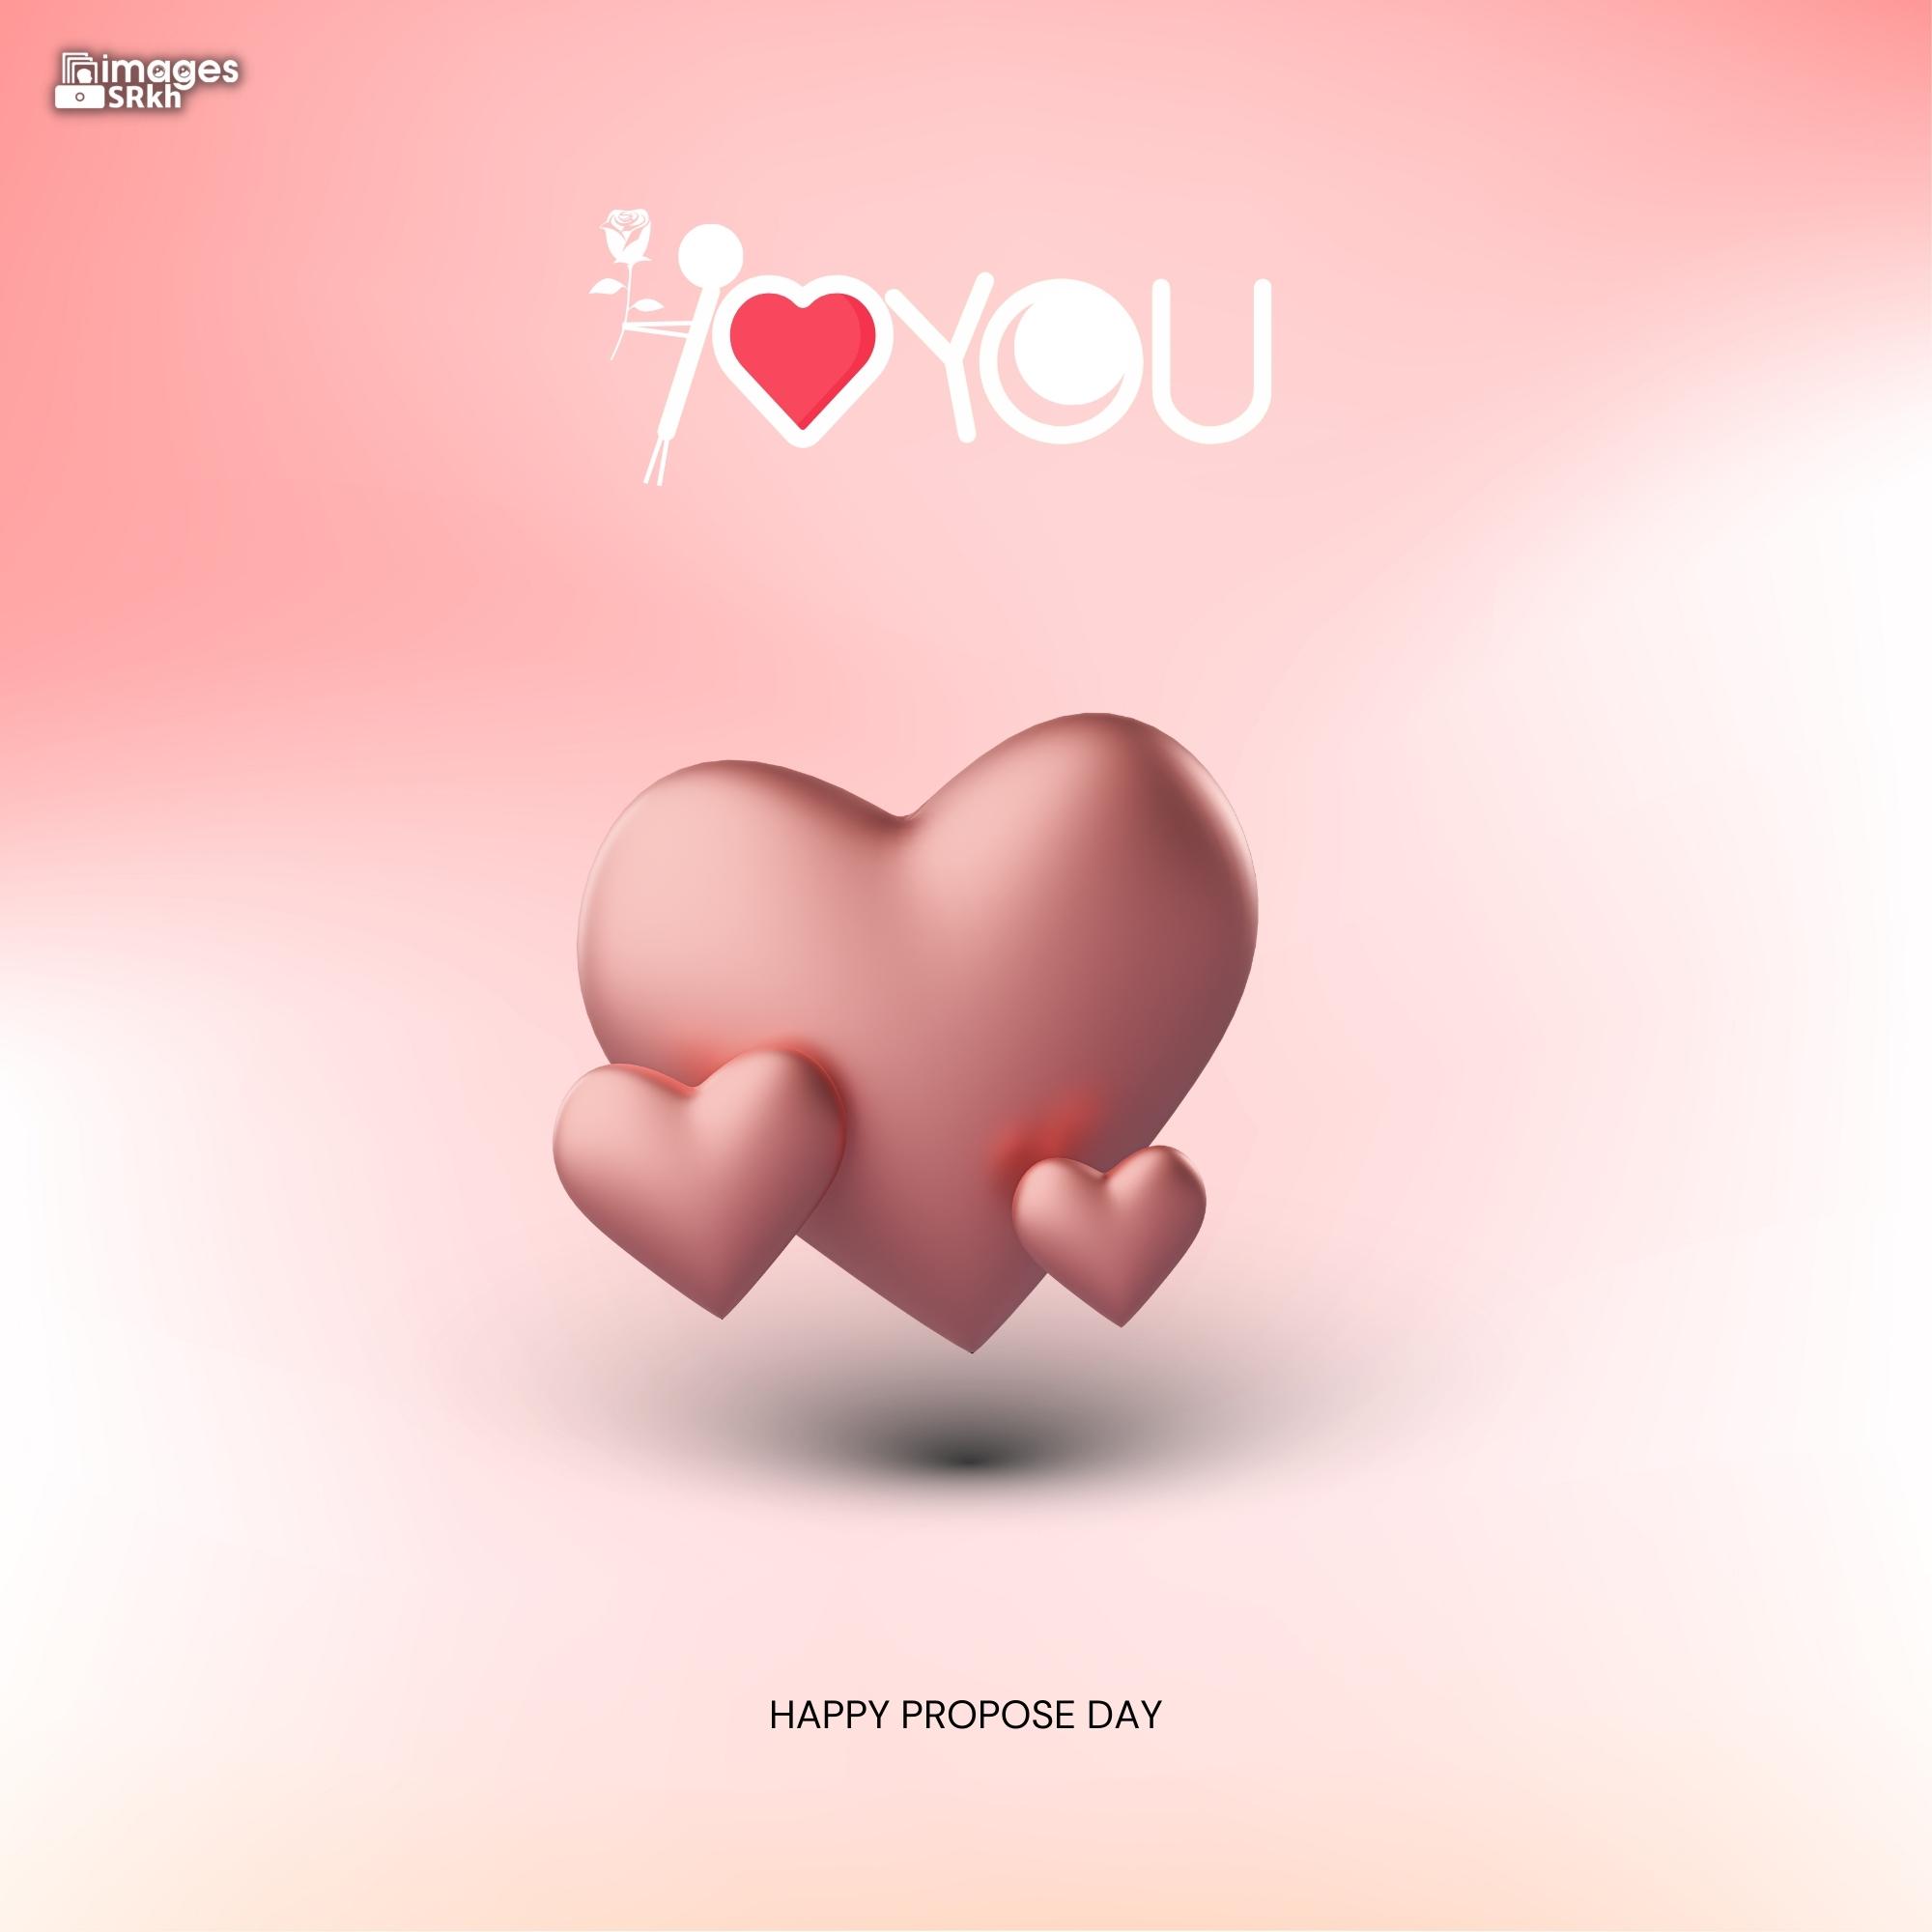 Happy Propose Day Images | 389 | I LOVE YOU